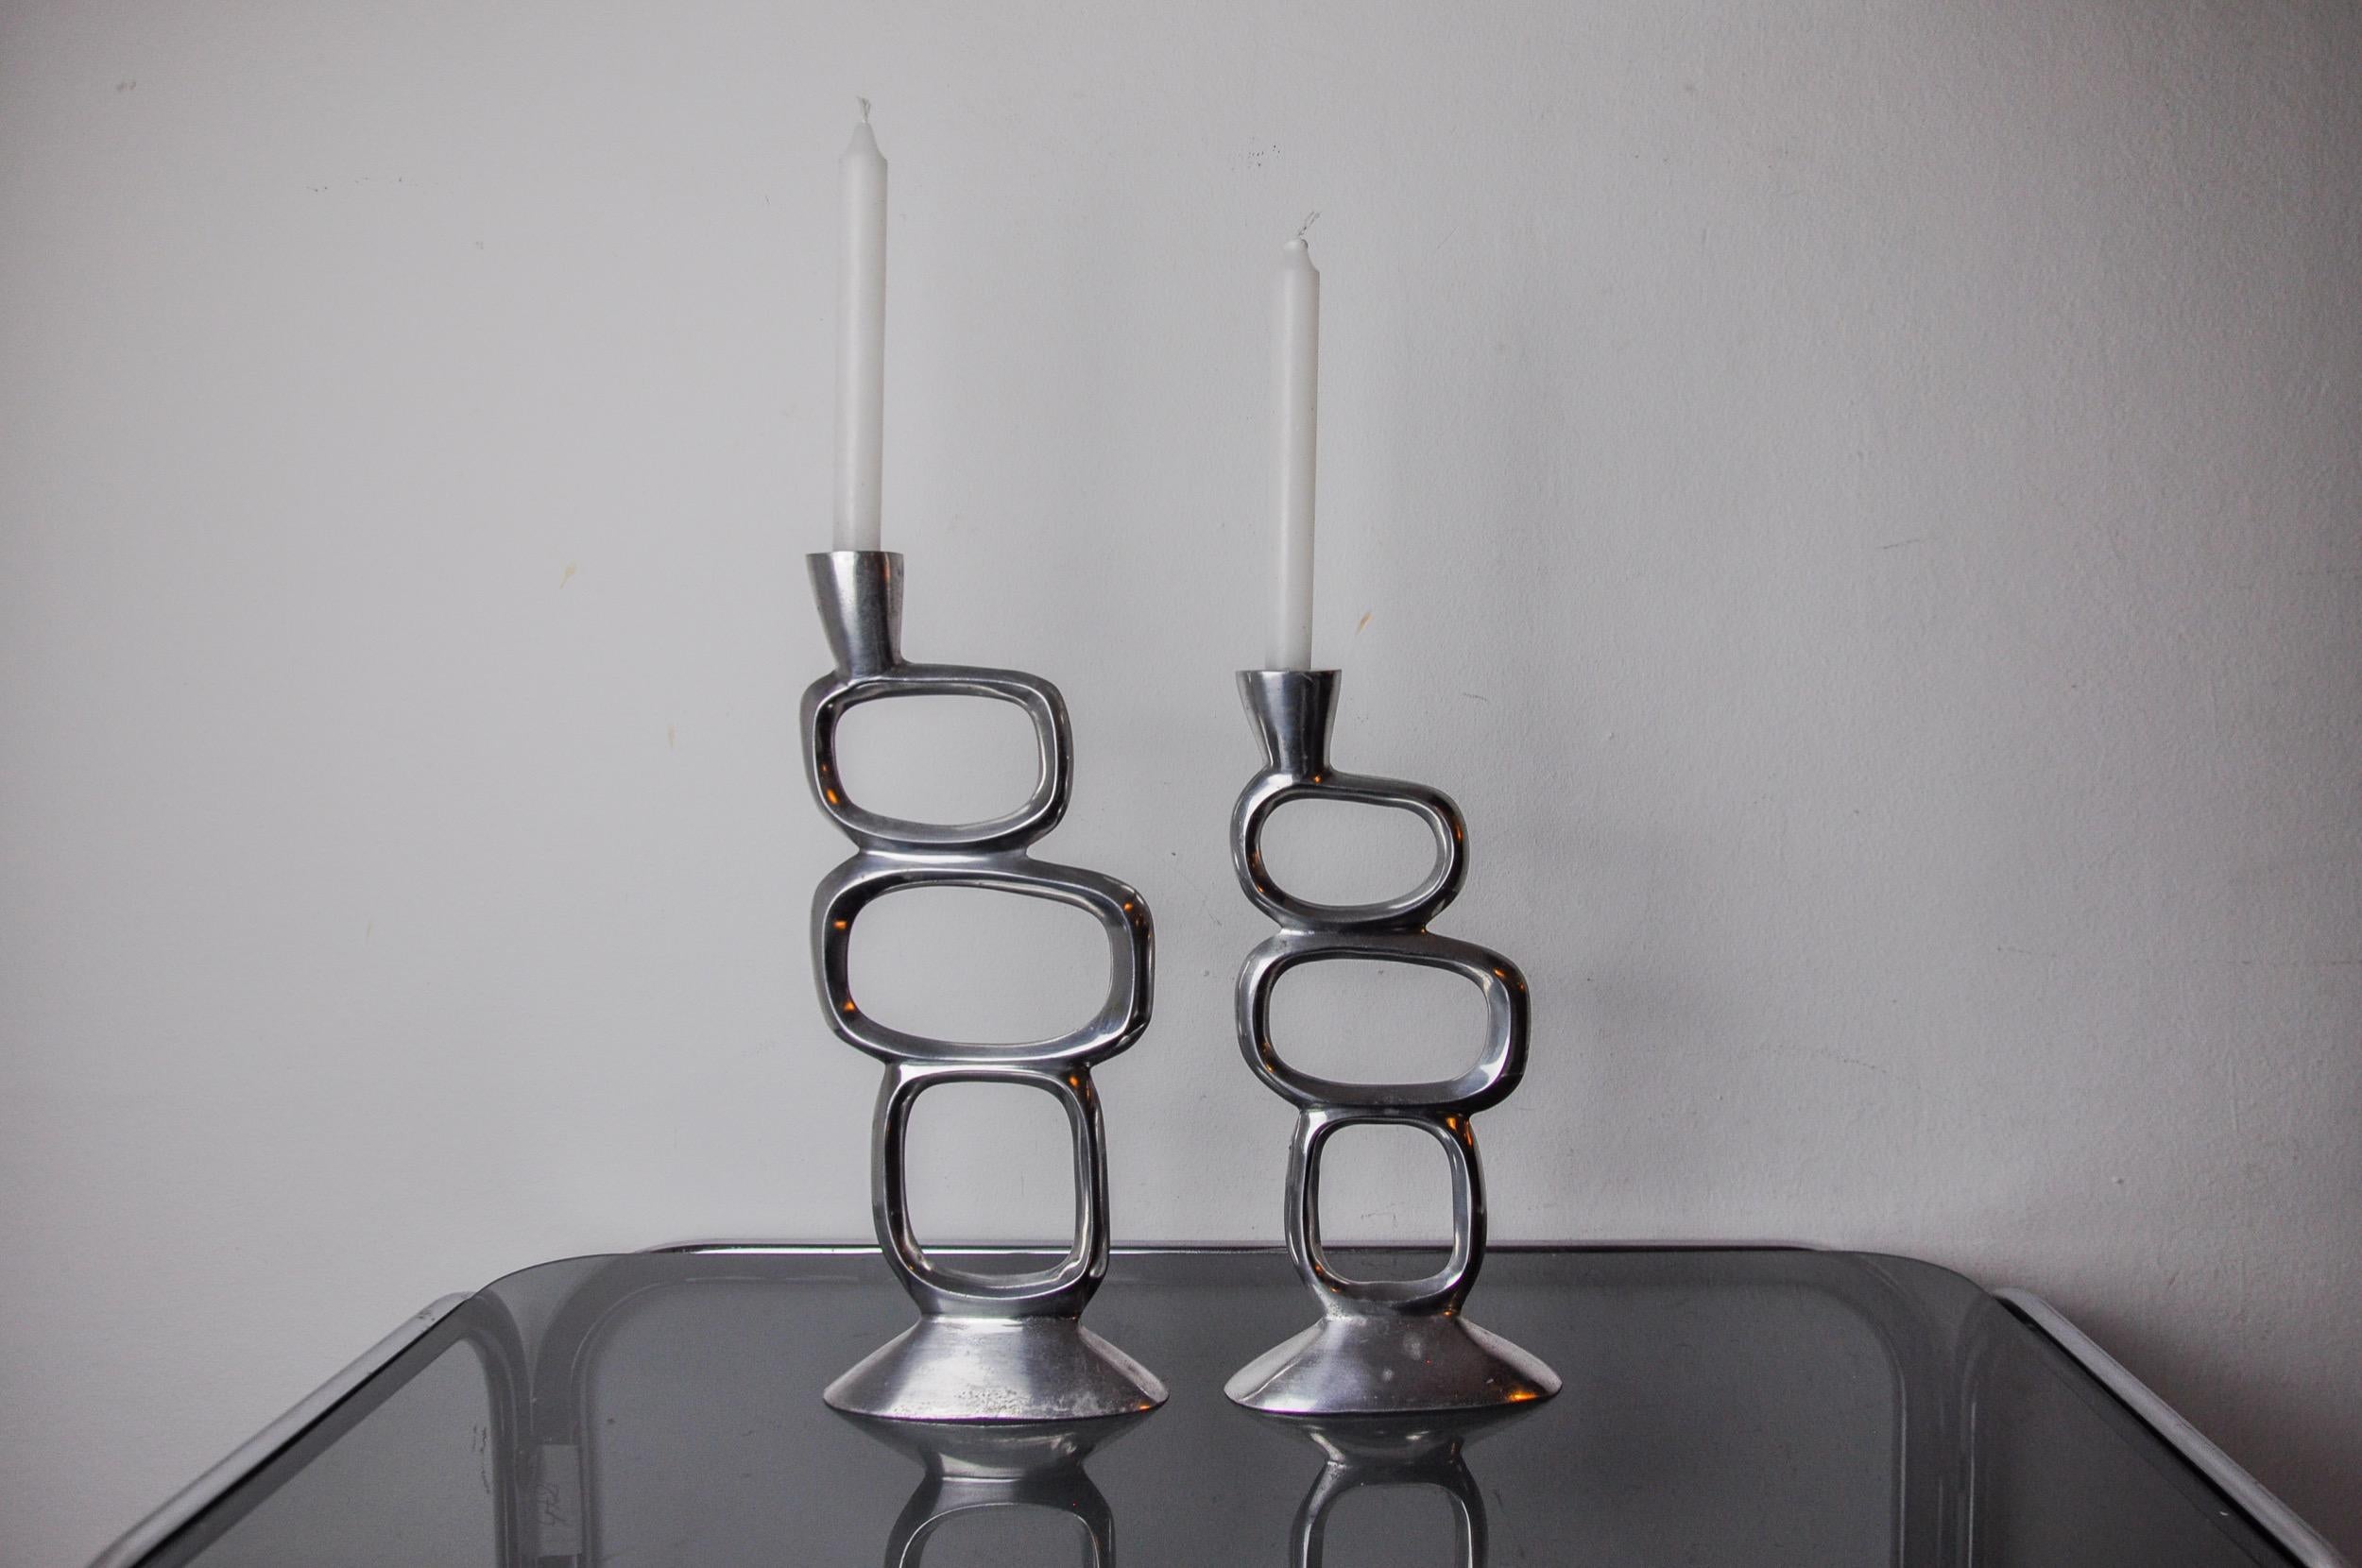 Pair of circle candlesticks designed and produced by matthew hilton in england in the 1980s. Set of two brutalist-style aluminum candle holders. Beautiful decorative objects that will bring a real design touch to your interior. Very nice state of